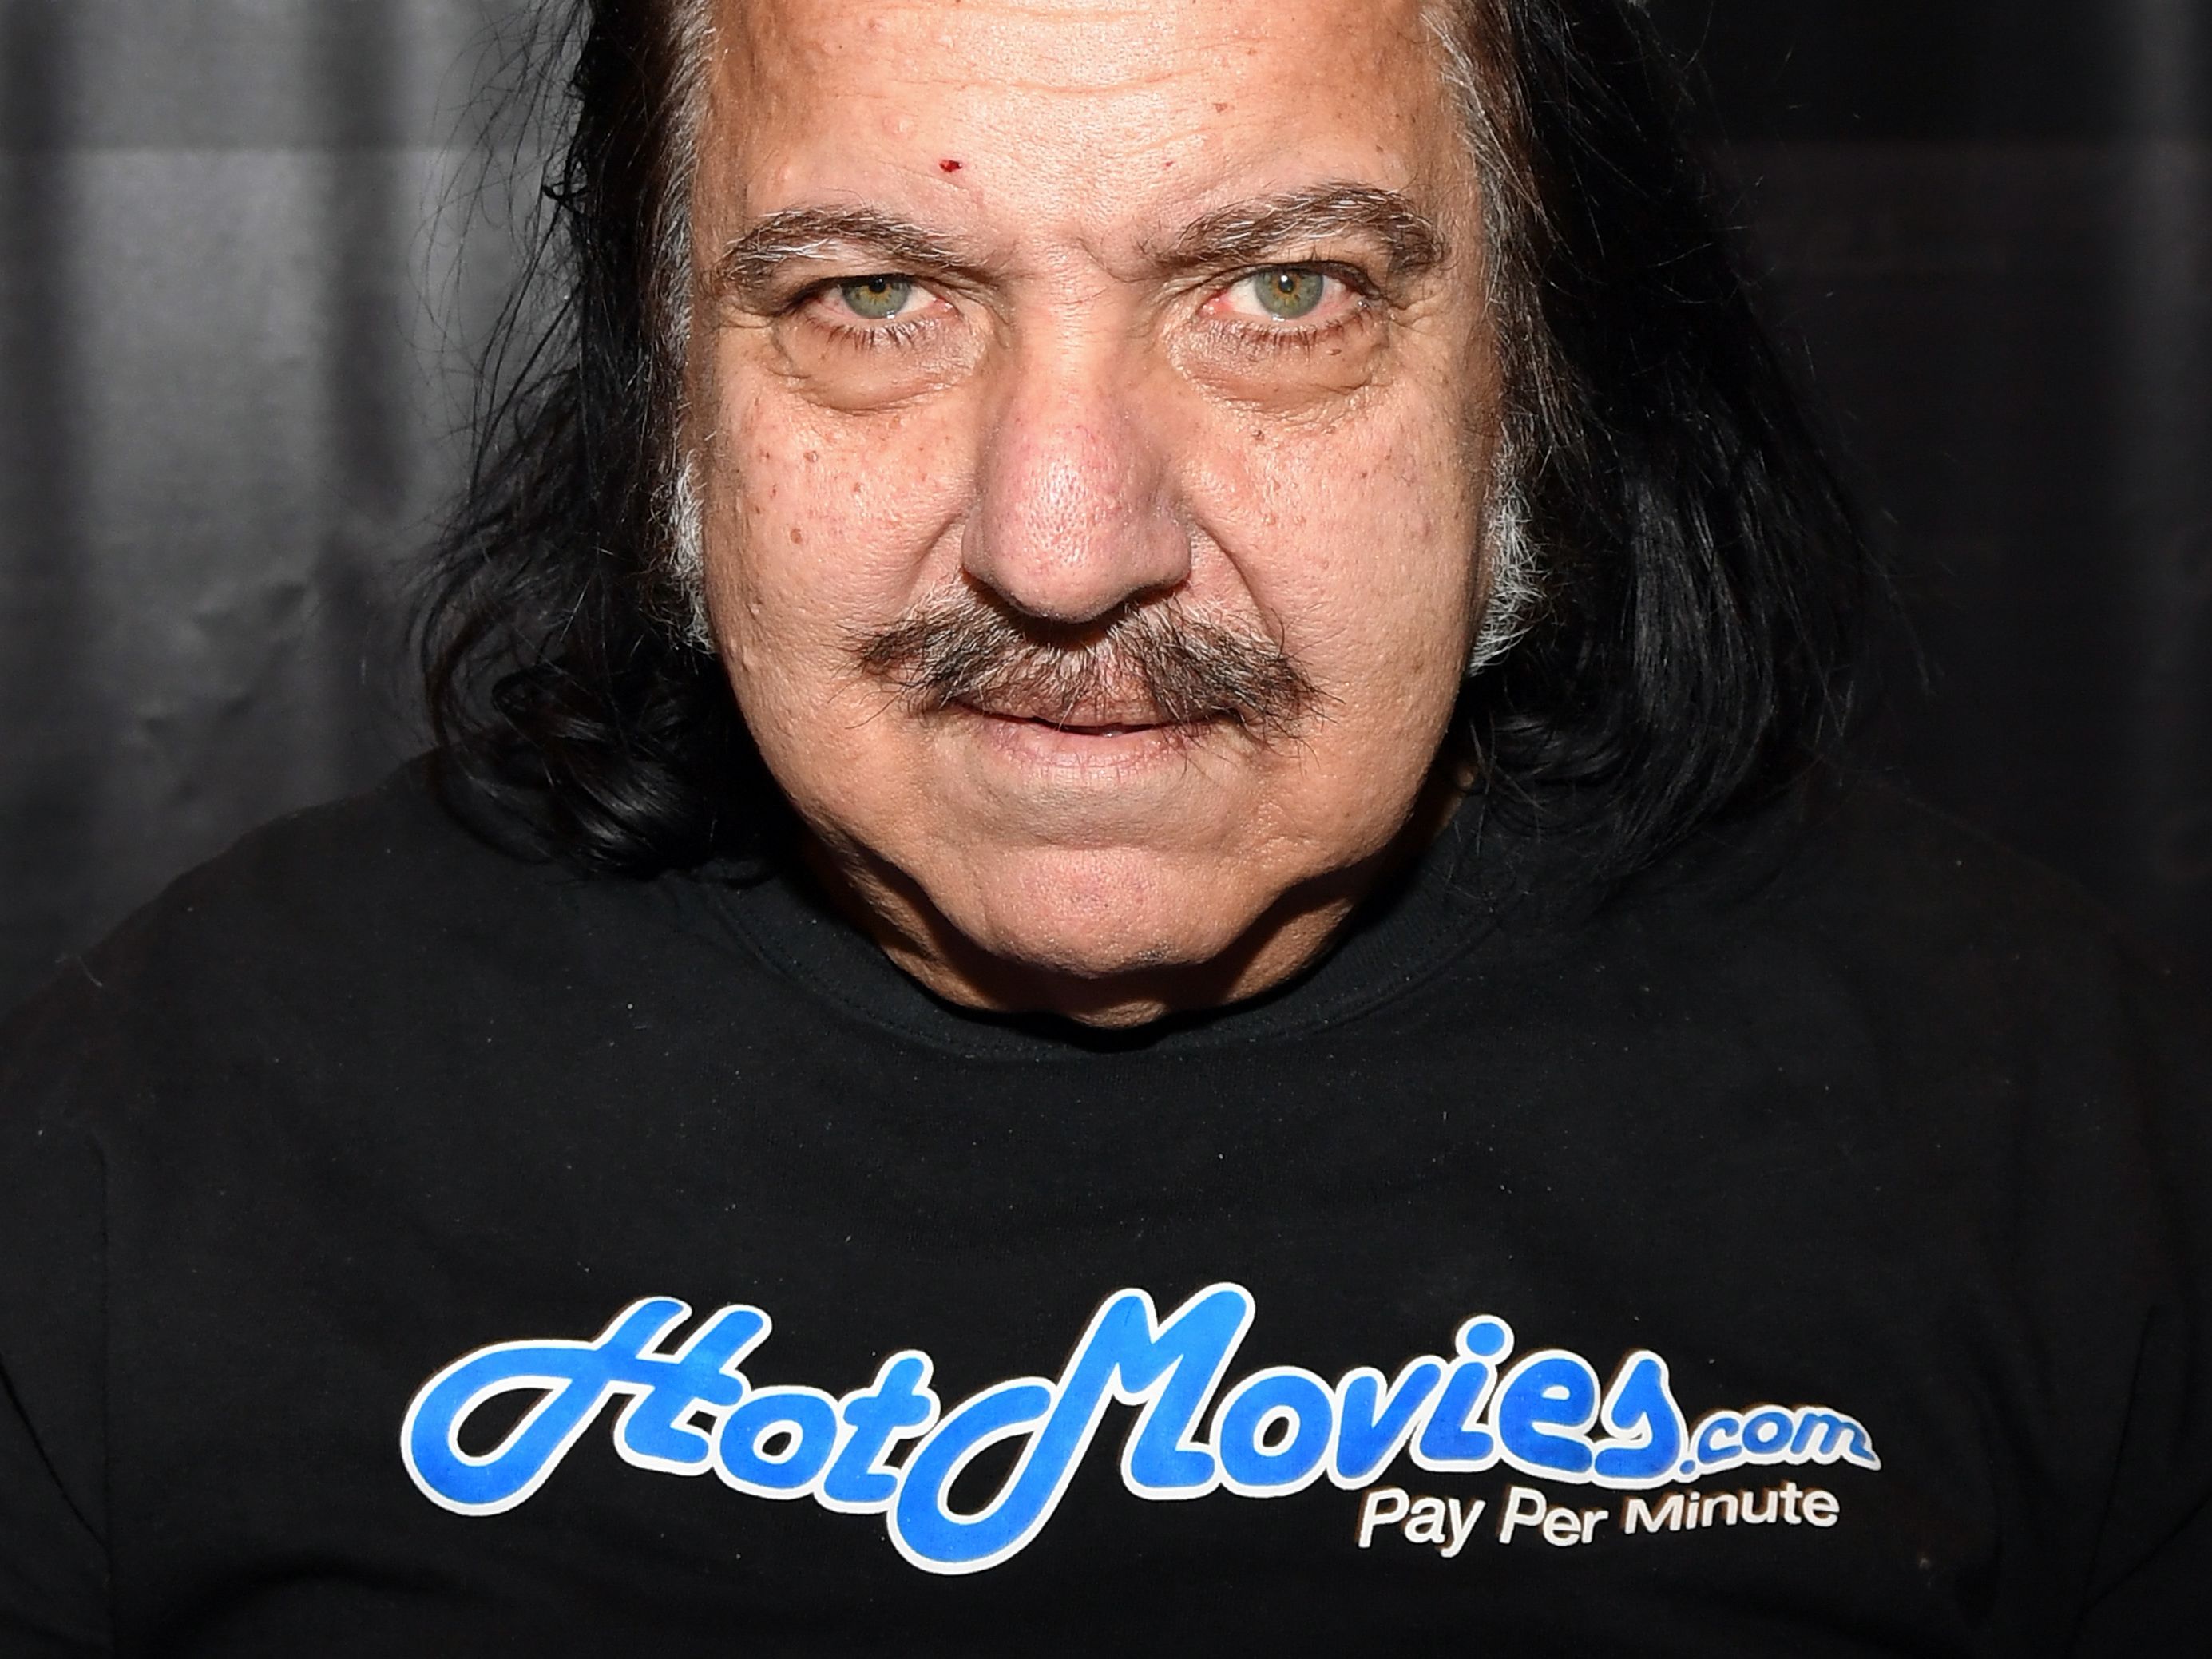 Xxx Videos Rafe - Porn star Ron Jeremy faces 20 more sexual assault charges | CNN